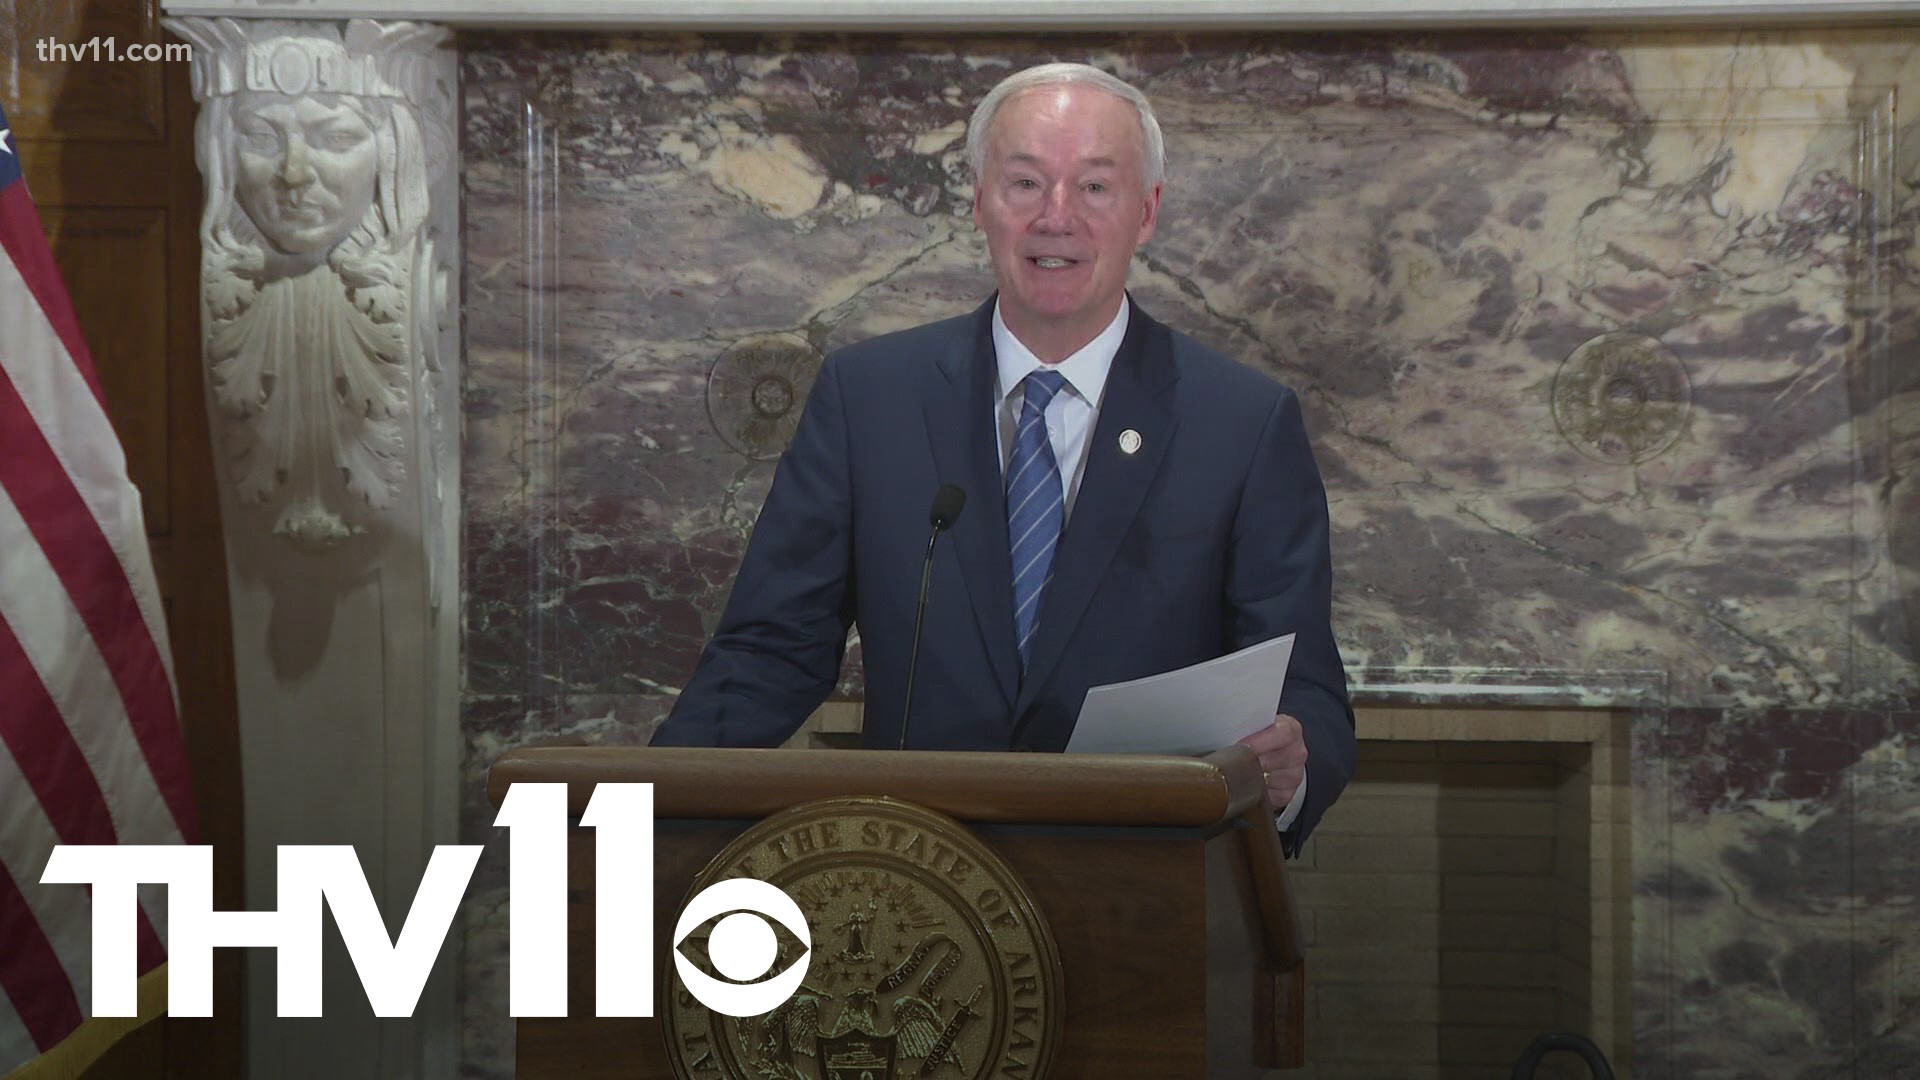 14 months after it was initially introduced, Gov. Hutchinson announced on Thursday that the Public Health Emergency Order will expire at the end of May.